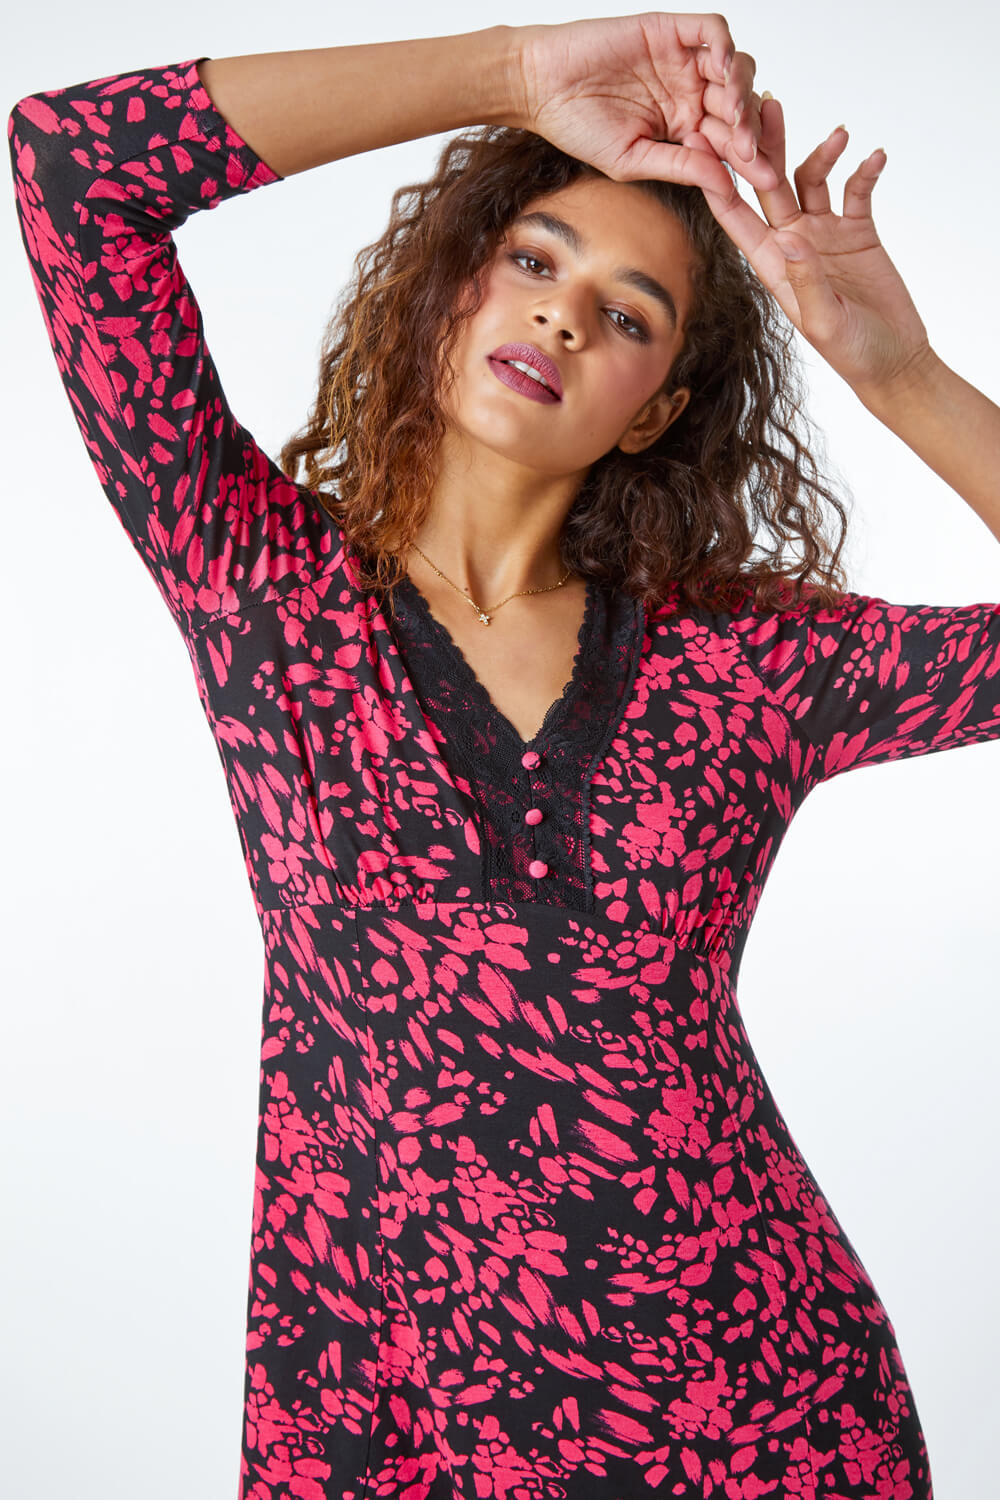 CERISE Lace Detail Abstract Midi Dress, Image 4 of 5